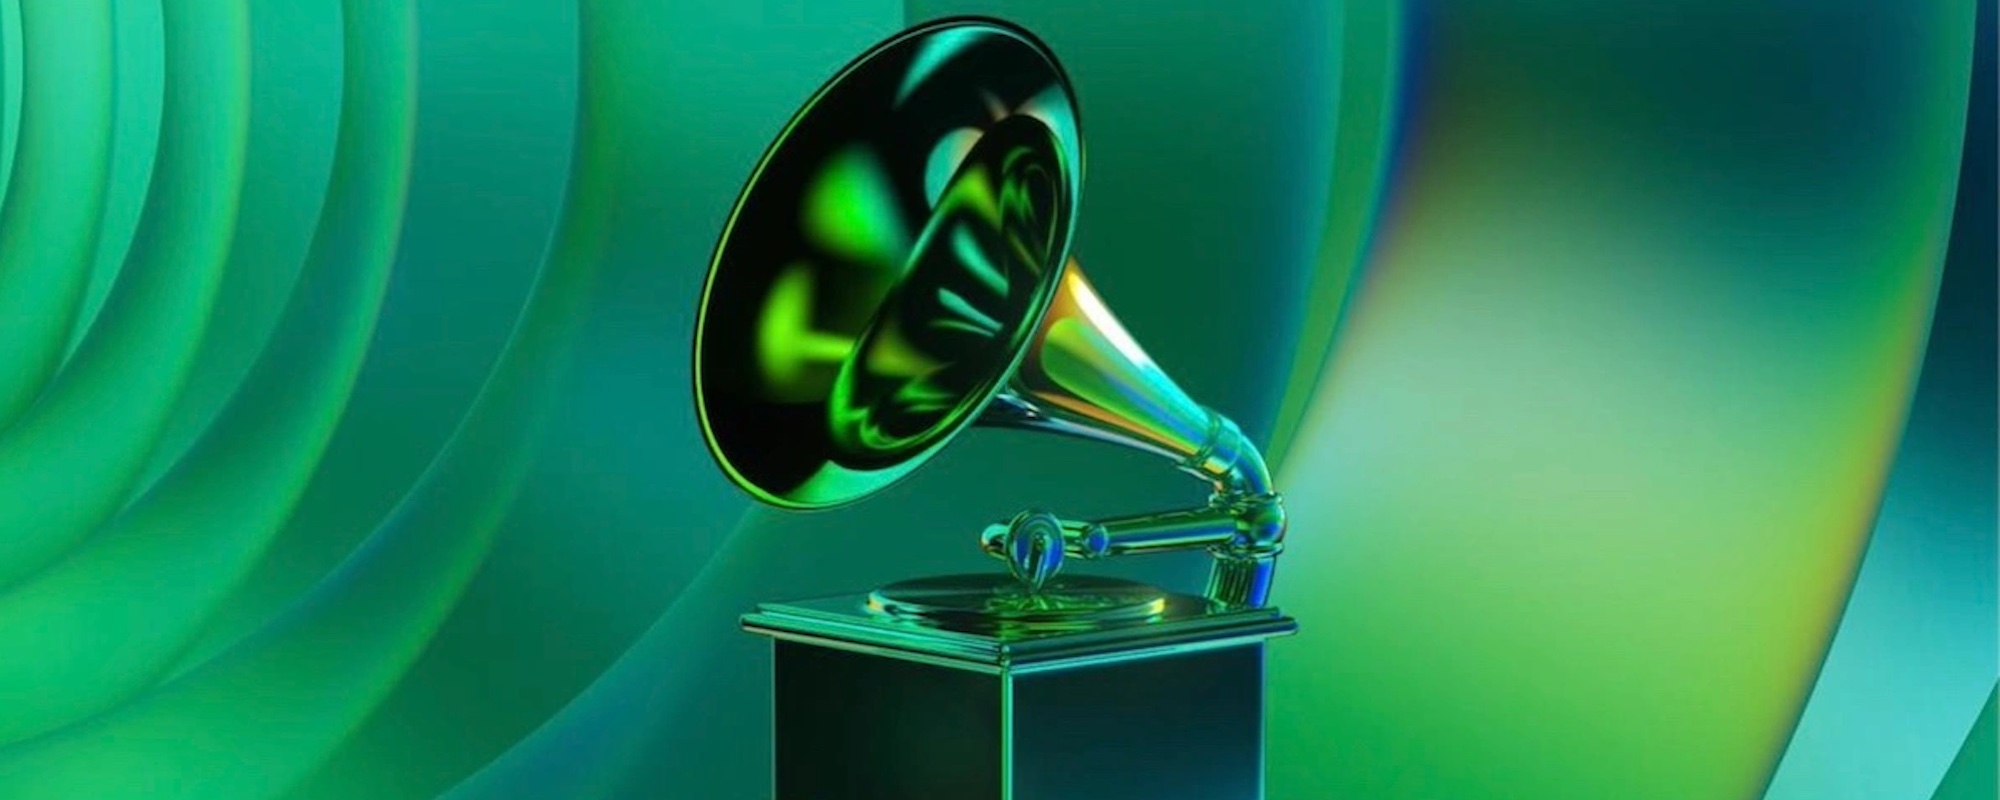 Recording Academy CEO Says AI Music Will Be Considered for a Grammy Award